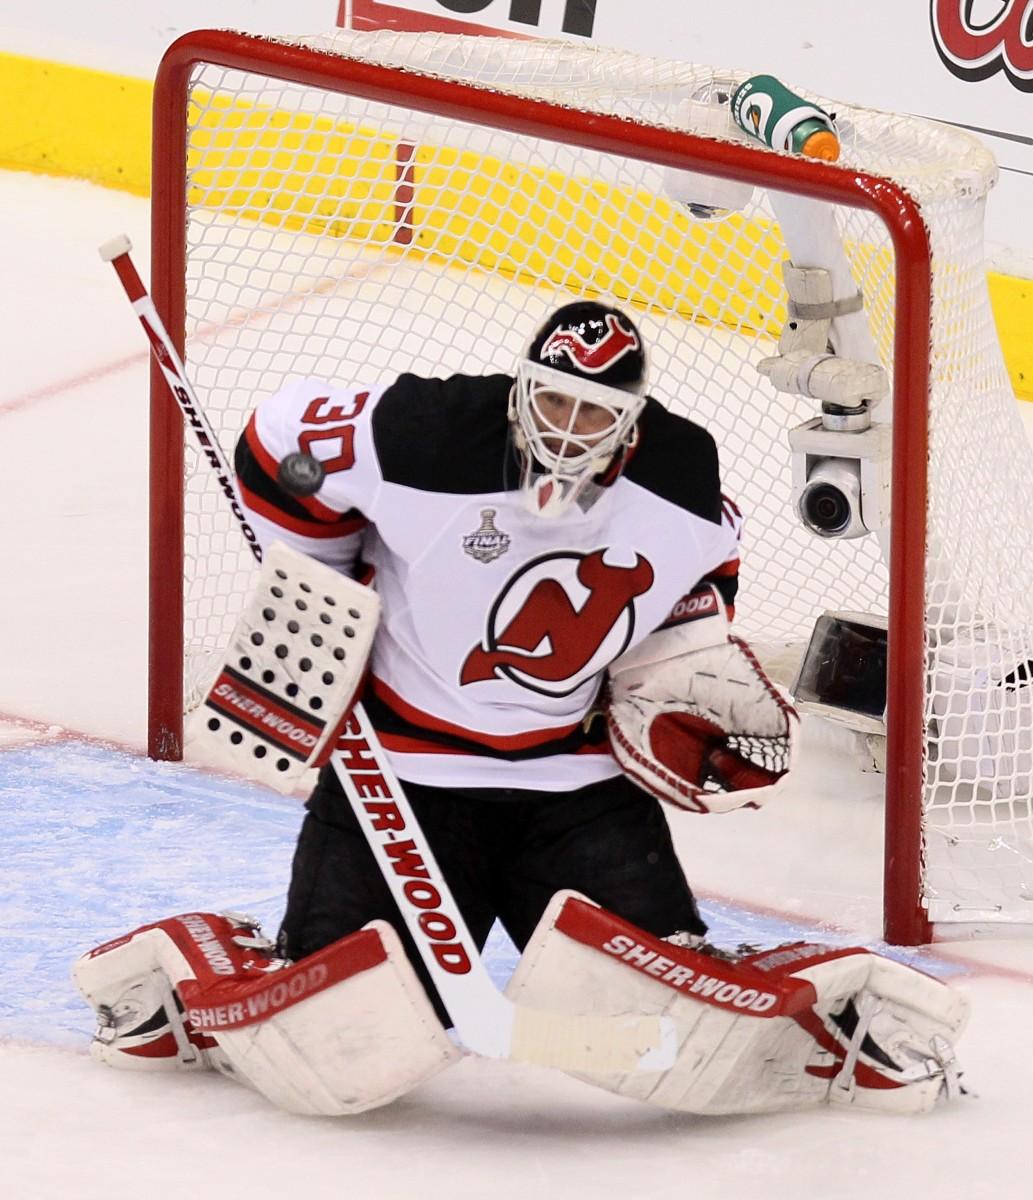 <a><img class="size-full wp-image-1786508" title="2012 NHL Stanley Cup Final ? Game Four" src="https://www.theepochtimes.com/assets/uploads/2015/09/Devils145829282.jpg" alt="The New Jersey Devils beat the Los Angeles Kings 3-1 in Game 4 on Wednesday night to prevent the Kings from winning their first Stanley Cup. New Jersey goaltender Martin Brodeur had a stellar game and Adam Henrique scored the game-winning goal late in the third period. (Jeff Gross/Getty Images)" width="1033" height="1200"/></a>